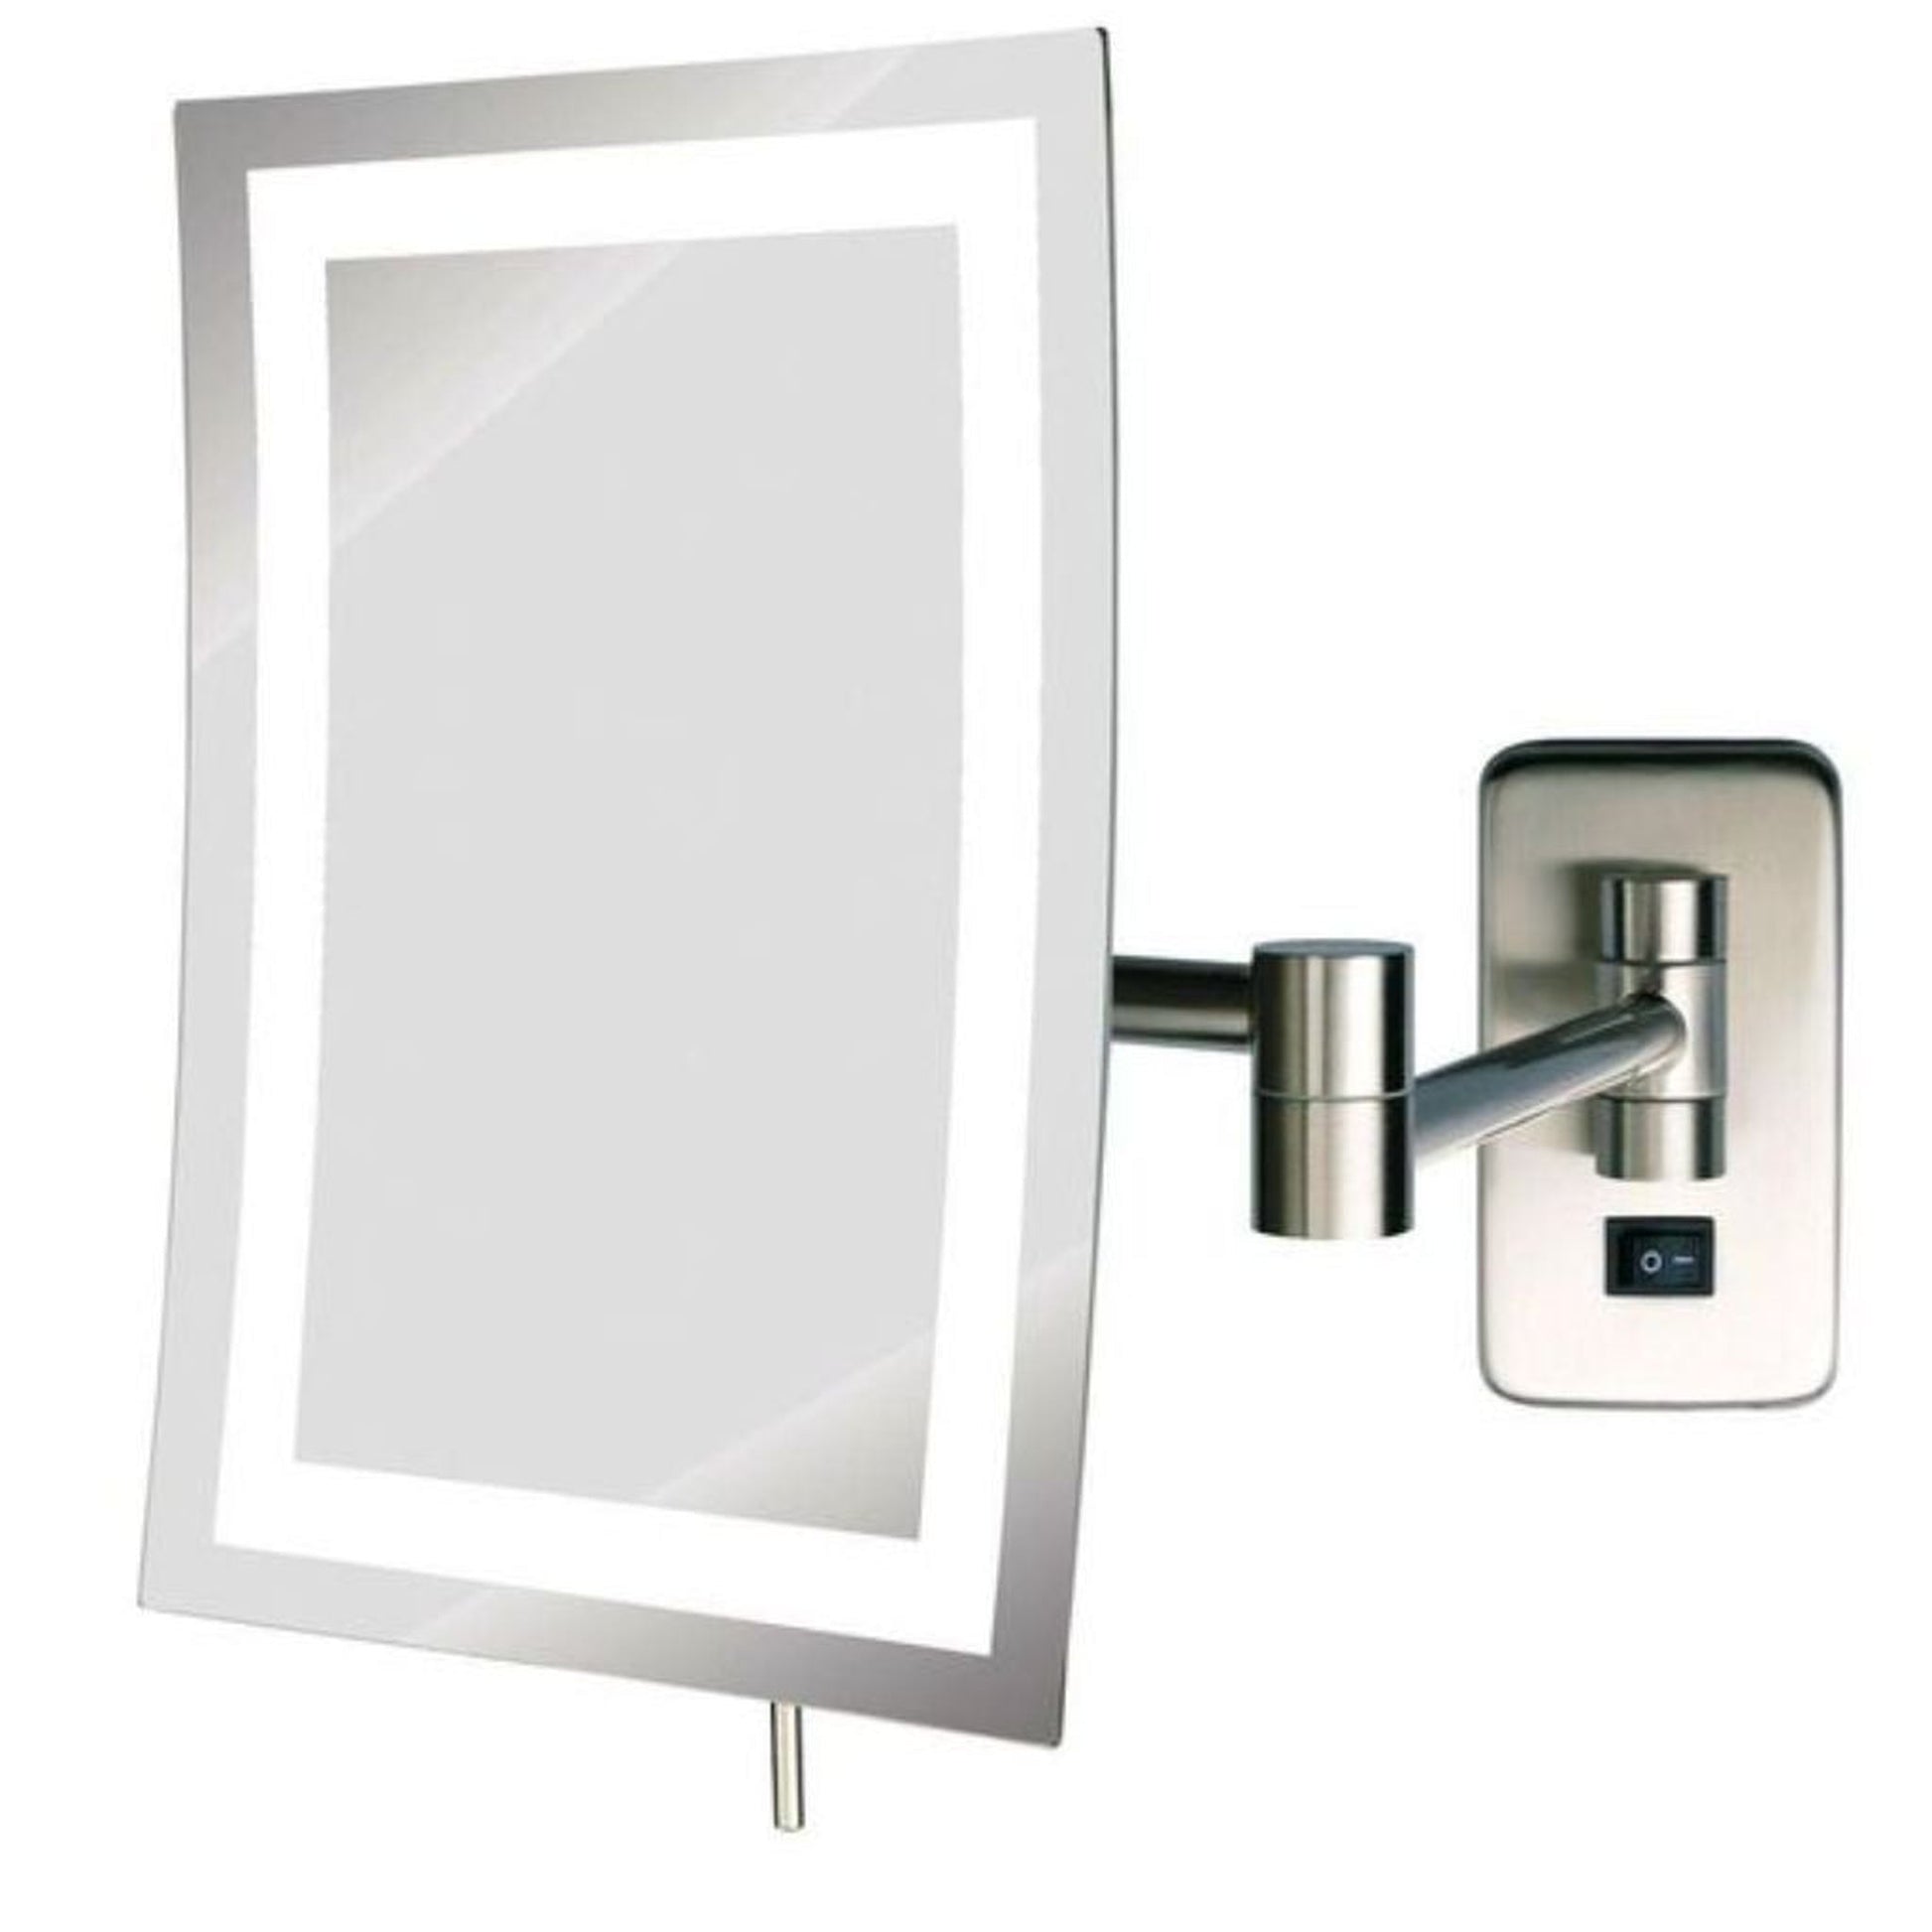 Aptations Kimball & Young 7" x 9" Brushed Nickel Wall-Mounted Contemporary Rectangular Single Sided 3X Magnified Makeup Mirror With Switchable 3,500K Warm White and 5,500K Cool White LED Light Color